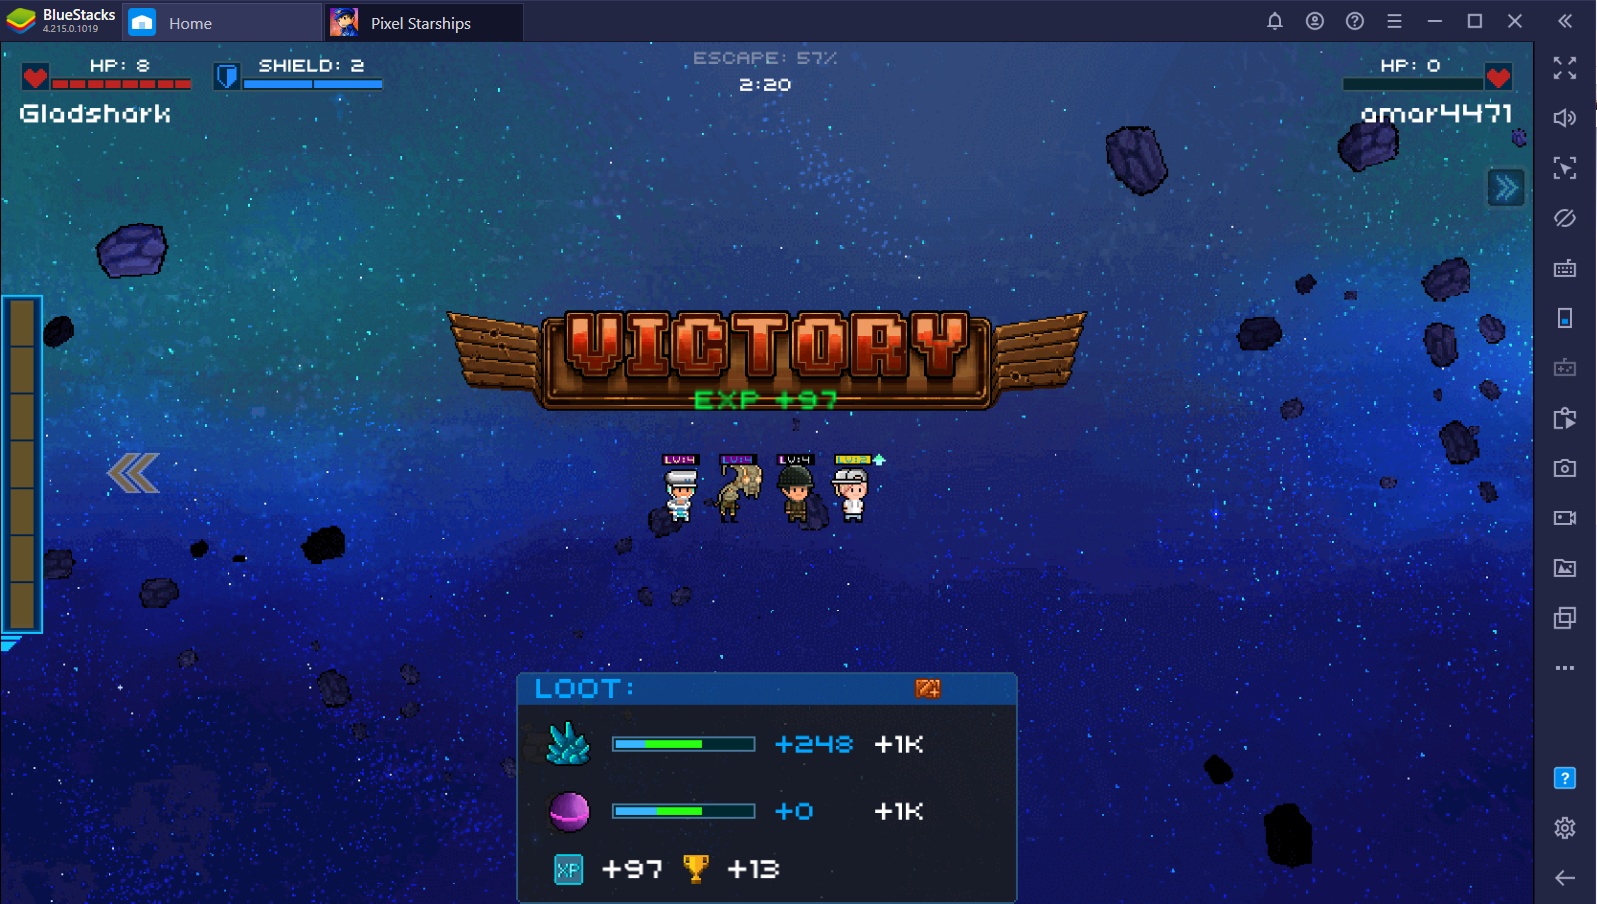 Intergalactic Review on Pixel Starships Galaxy with BlueStacks on PC